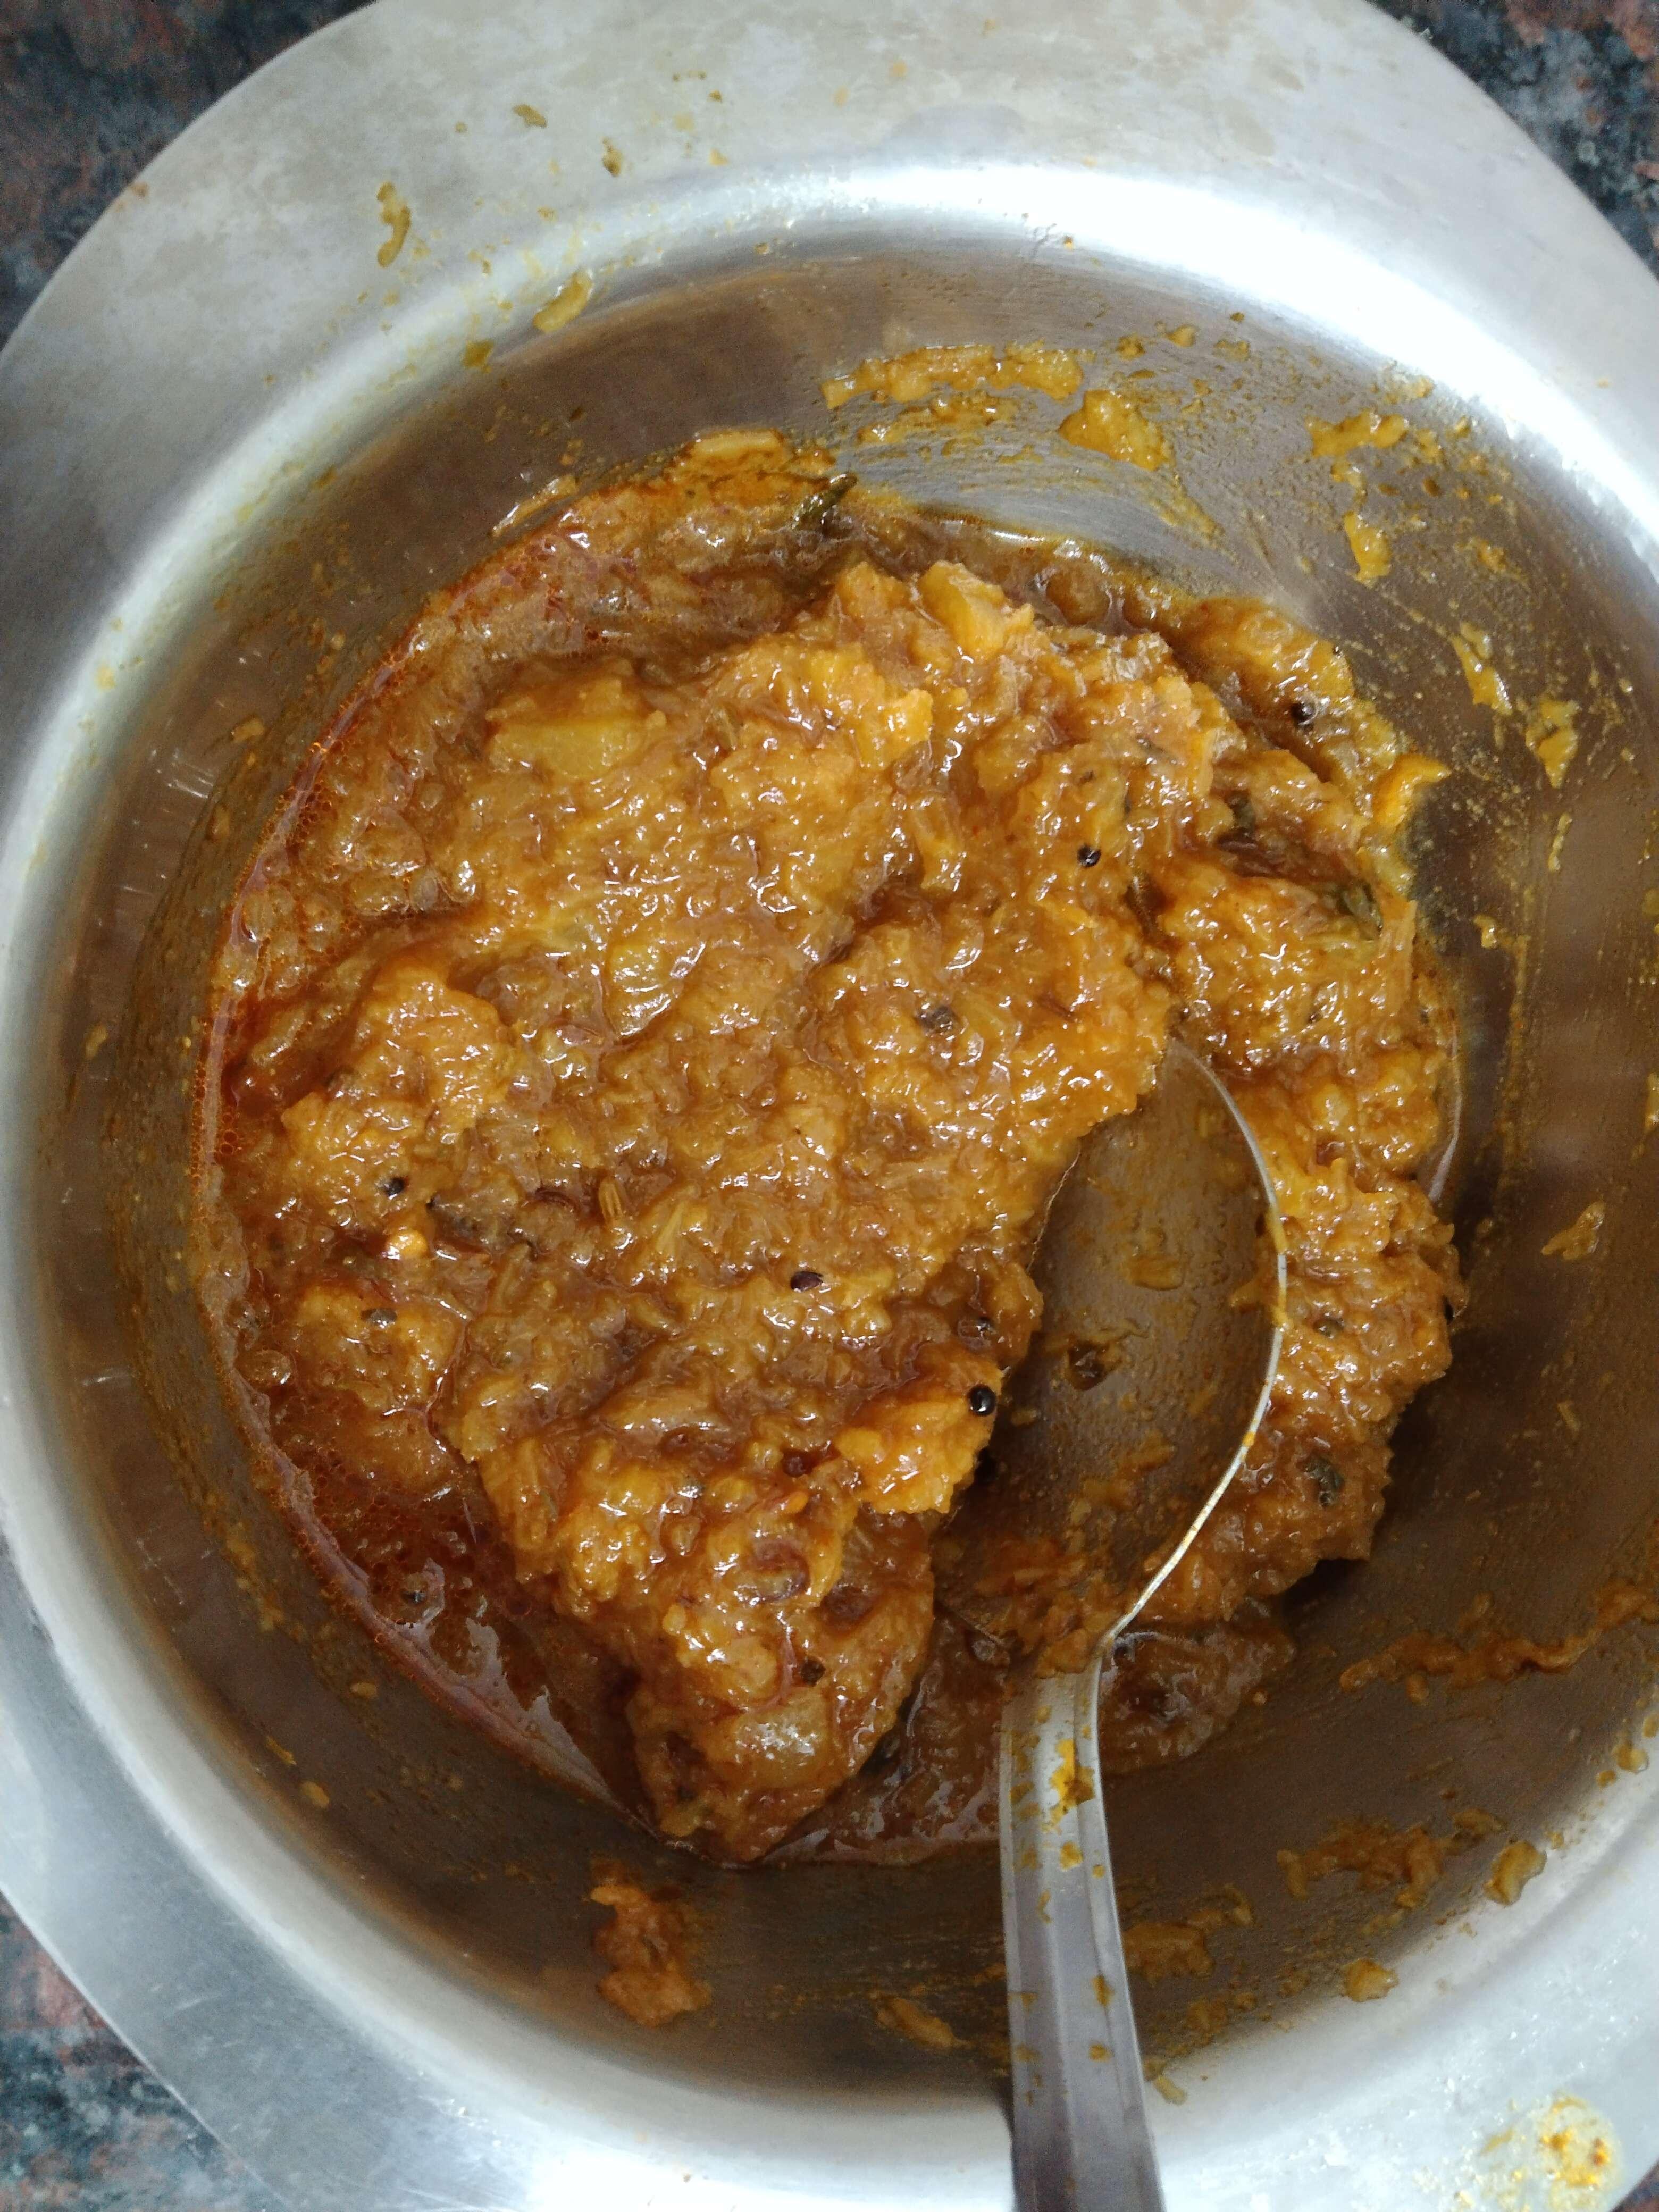 Tasty Kaddu ki Sabzi cooked by COOX chefs cooks during occasions parties events at home